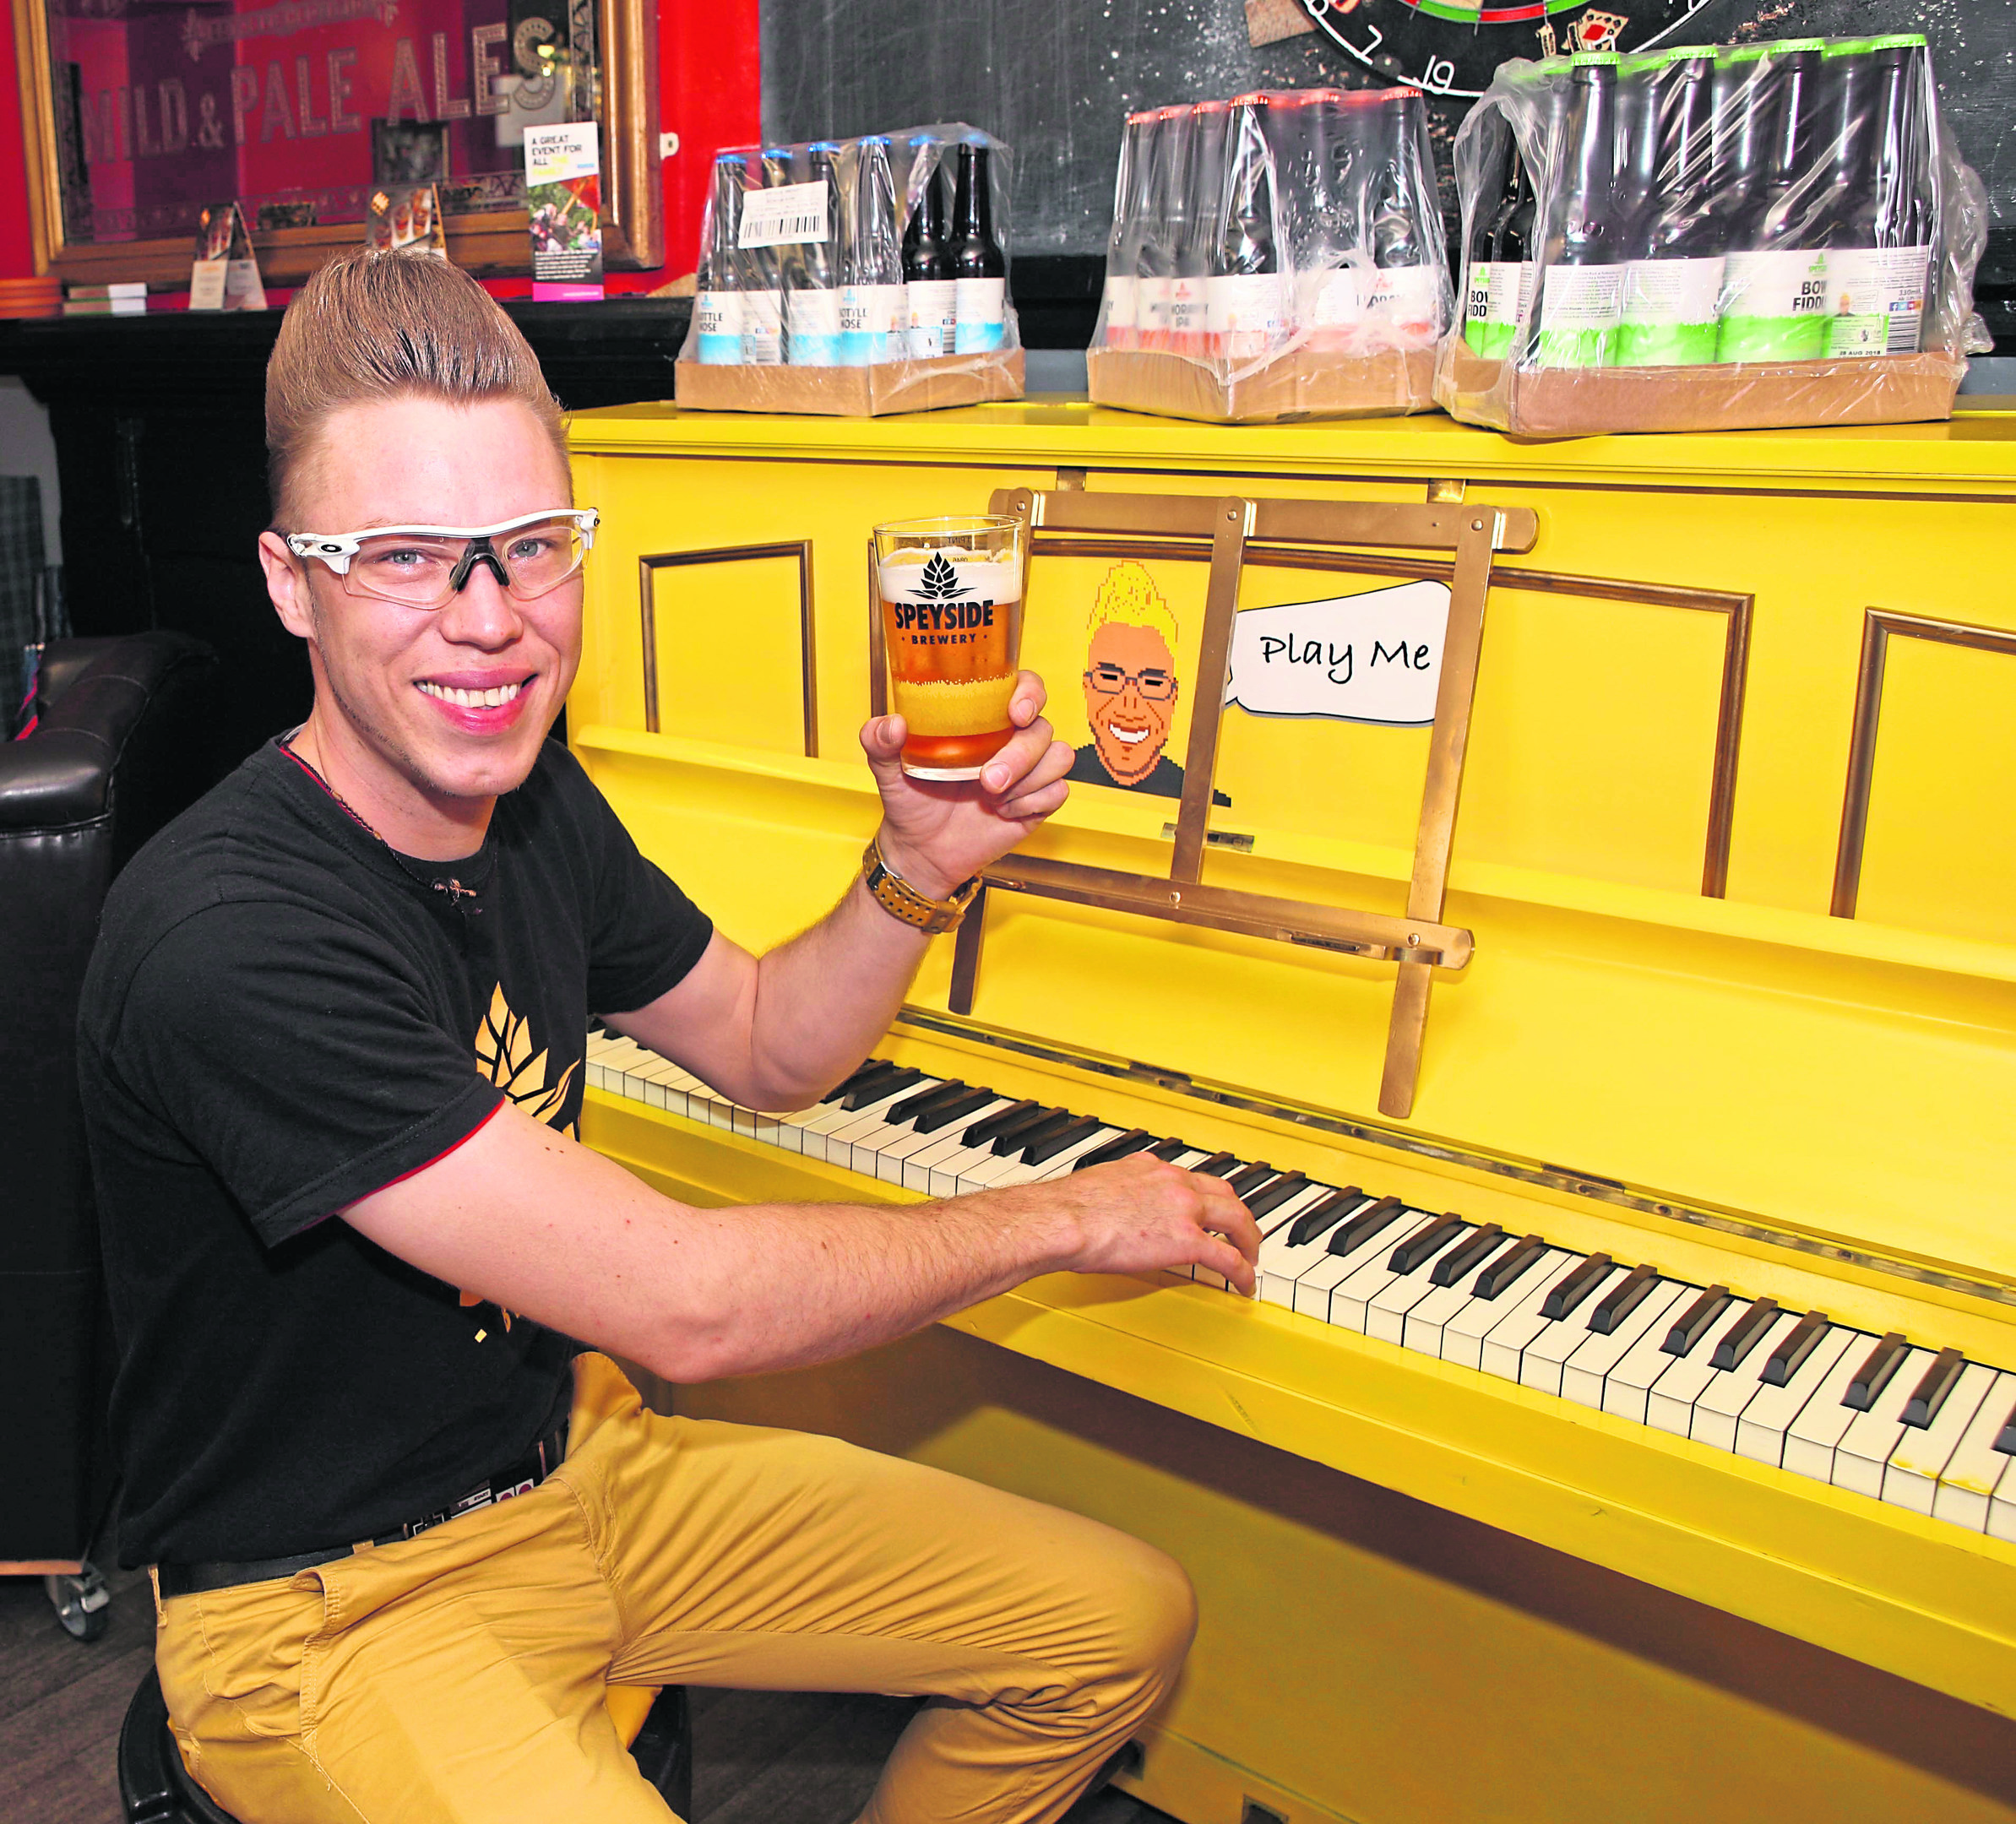 Seb Jones from the Speyside brewery who is delivering pianos to pubs along with his beer.